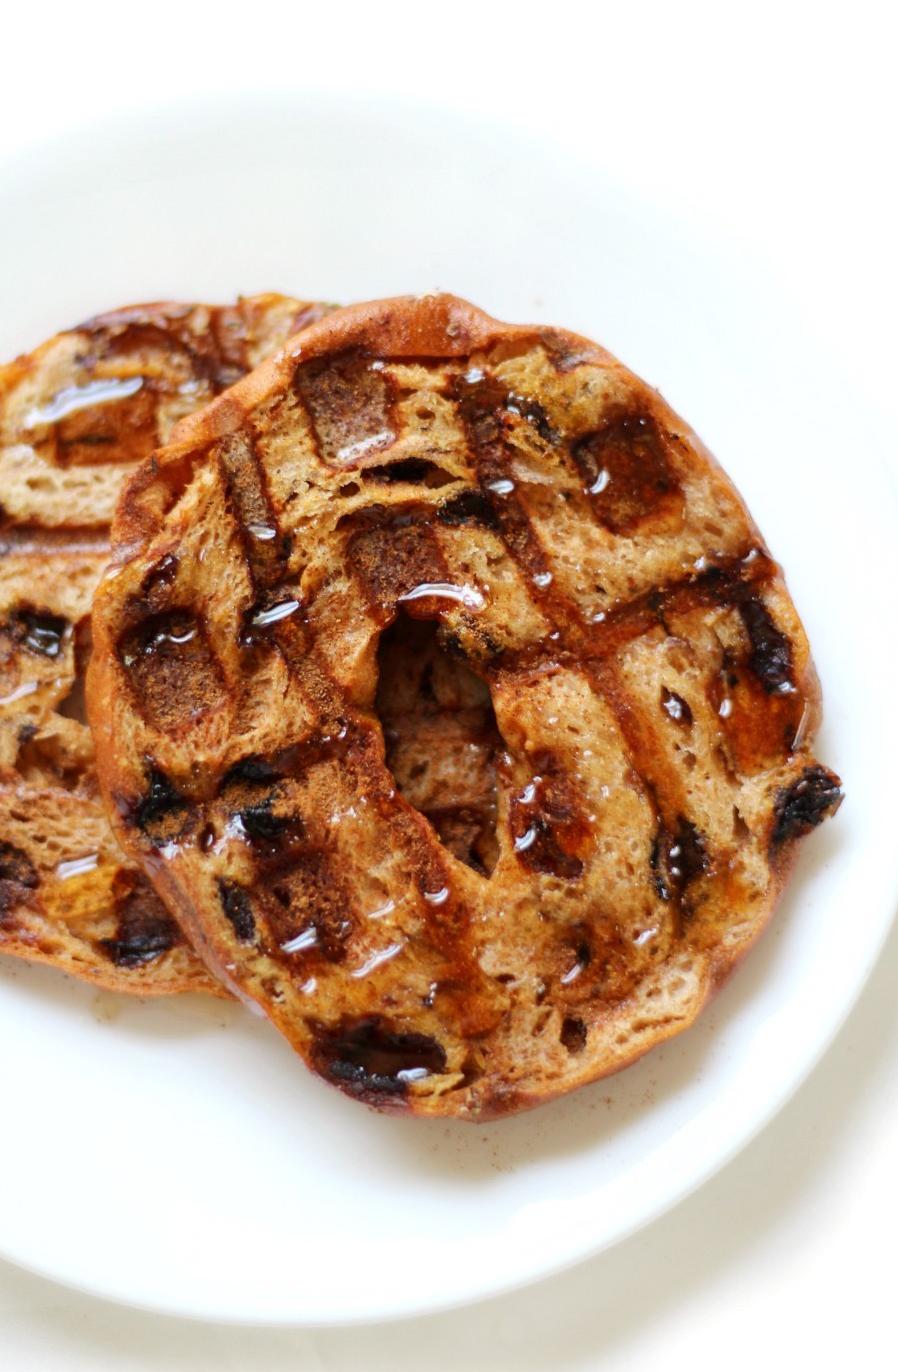  Who says gluten-free can't be tasty? These waffle french toasts beg to differ